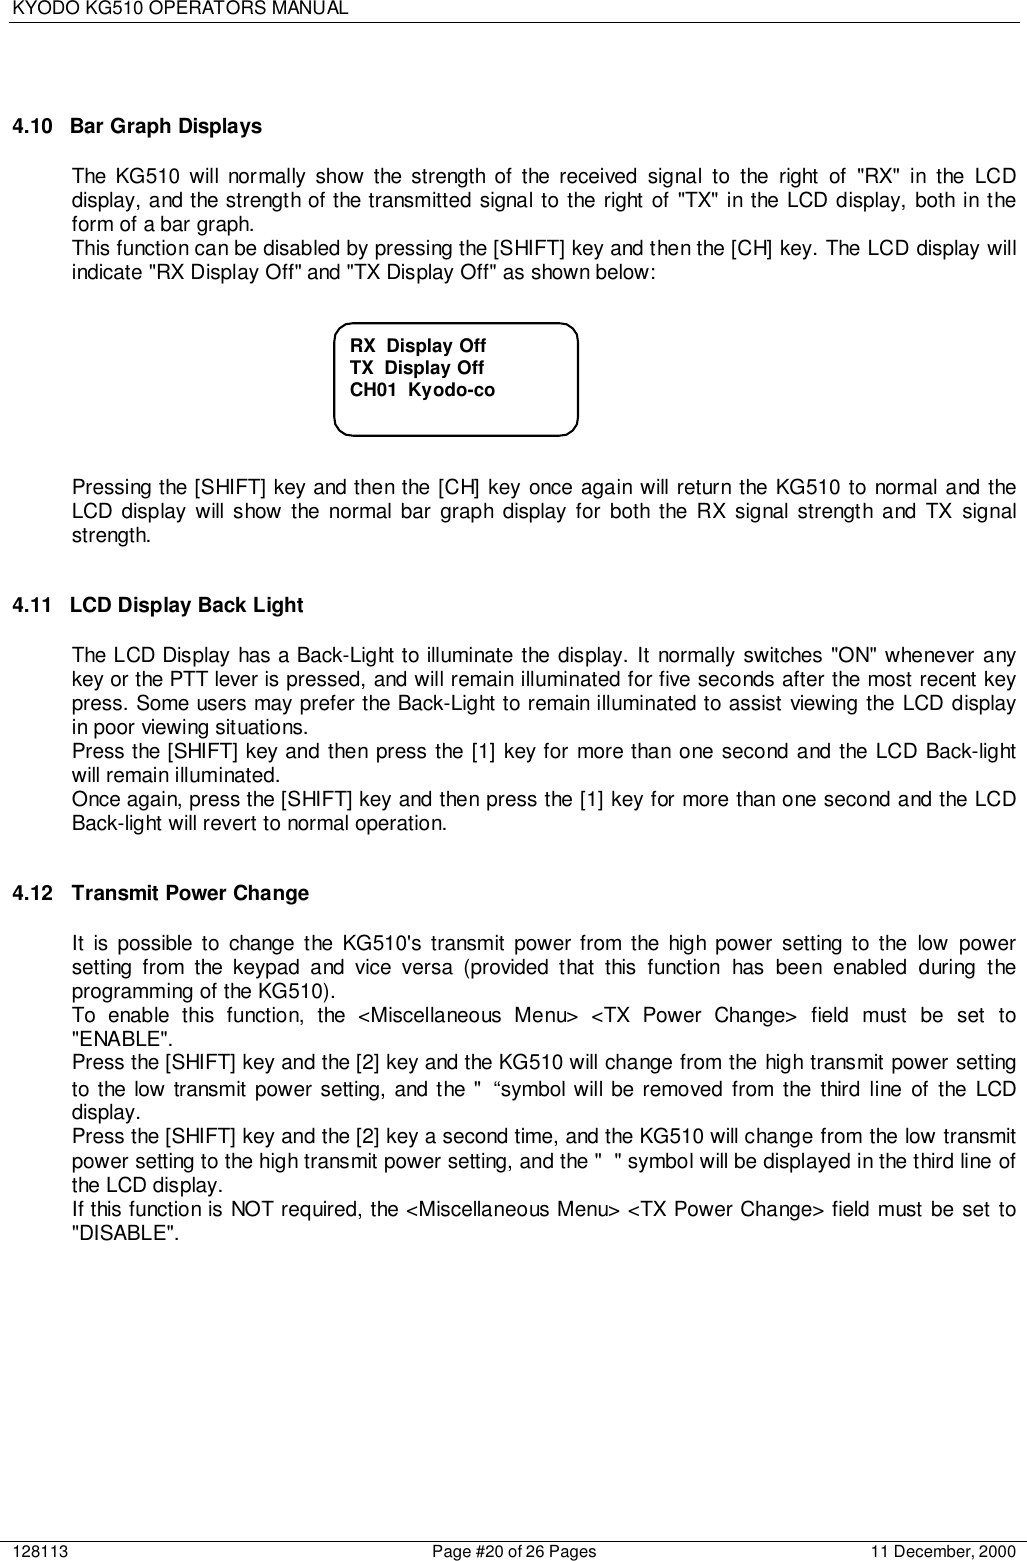 KYODO KG510 OPERATORS MANUAL128113 Page #20 of 26 Pages 11 December, 20004.10  Bar Graph DisplaysThe KG510 will normally show the strength of the received signal to the right of &quot;RX&quot; in the LCDdisplay, and the strength of the transmitted signal to the right of &quot;TX&quot; in the LCD display, both in theform of a bar graph.This function can be disabled by pressing the [SHIFT] key and then the [CH] key. The LCD display willindicate &quot;RX Display Off&quot; and &quot;TX Display Off&quot; as shown below:Pressing the [SHIFT] key and then the [CH] key once again will return the KG510 to normal and theLCD display will show the normal bar graph display for both the RX signal strength and TX signalstrength.4.11  LCD Display Back LightThe LCD Display has a Back-Light to illuminate the display. It normally switches &quot;ON&quot; whenever anykey or the PTT lever is pressed, and will remain illuminated for five seconds after the most recent keypress. Some users may prefer the Back-Light to remain illuminated to assist viewing the LCD displayin poor viewing situations.Press the [SHIFT] key and then press the [1] key for more than one second and the LCD Back-lightwill remain illuminated.Once again, press the [SHIFT] key and then press the [1] key for more than one second and the LCDBack-light will revert to normal operation.4.12 Transmit Power ChangeIt is possible to change the KG510&apos;s transmit power from the high power setting to the low powersetting from the keypad and vice versa (provided that this function has been enabled during theprogramming of the KG510).To enable this function, the &lt;Miscellaneous Menu&gt; &lt;TX Power Change&gt; field must be set to&quot;ENABLE&quot;.Press the [SHIFT] key and the [2] key and the KG510 will change from the high transmit power settingto the low transmit power setting, and the &quot; “symbol will be removed from the third line of the LCDdisplay.Press the [SHIFT] key and the [2] key a second time, and the KG510 will change from the low transmitpower setting to the high transmit power setting, and the &quot; &quot; symbol will be displayed in the third line ofthe LCD display.If this function is NOT required, the &lt;Miscellaneous Menu&gt; &lt;TX Power Change&gt; field must be set to&quot;DISABLE&quot;.RX  Display OffTX  Display OffCH01  Kyodo-co